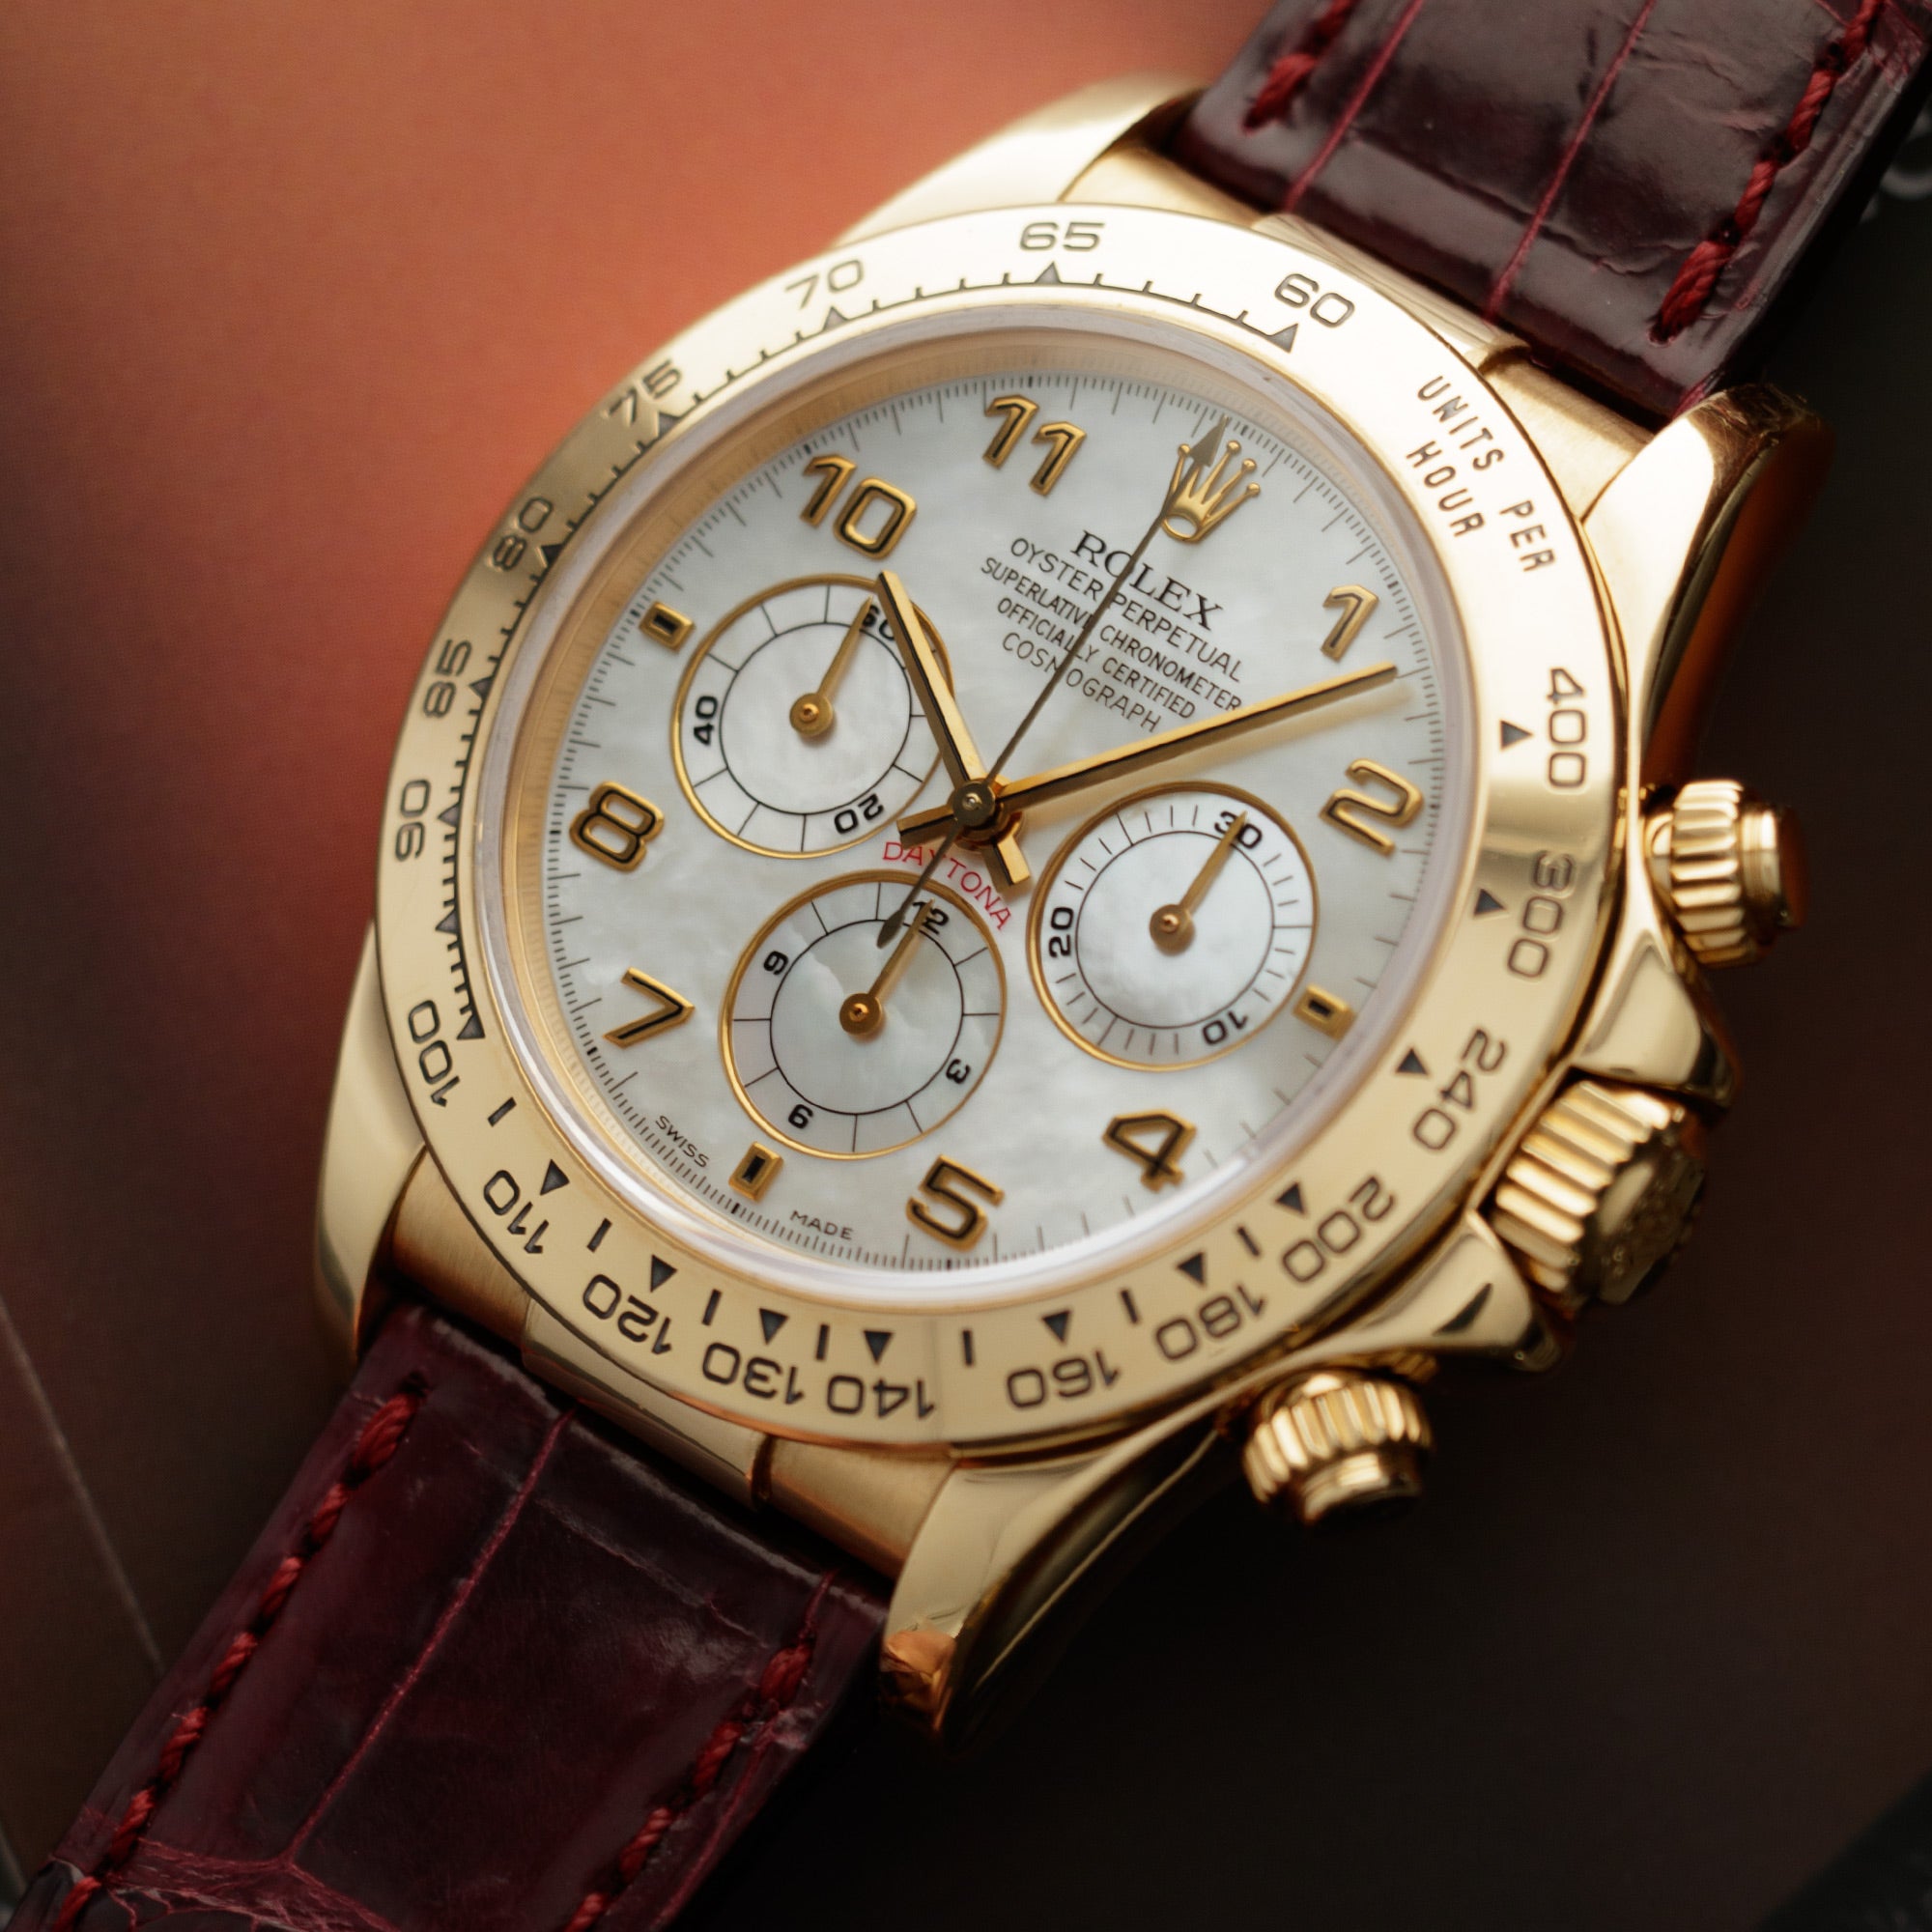 Rolex - Rolex yellow Gold Daytona Ref. 16518 with Mother of Pearl Dial - The Keystone Watches